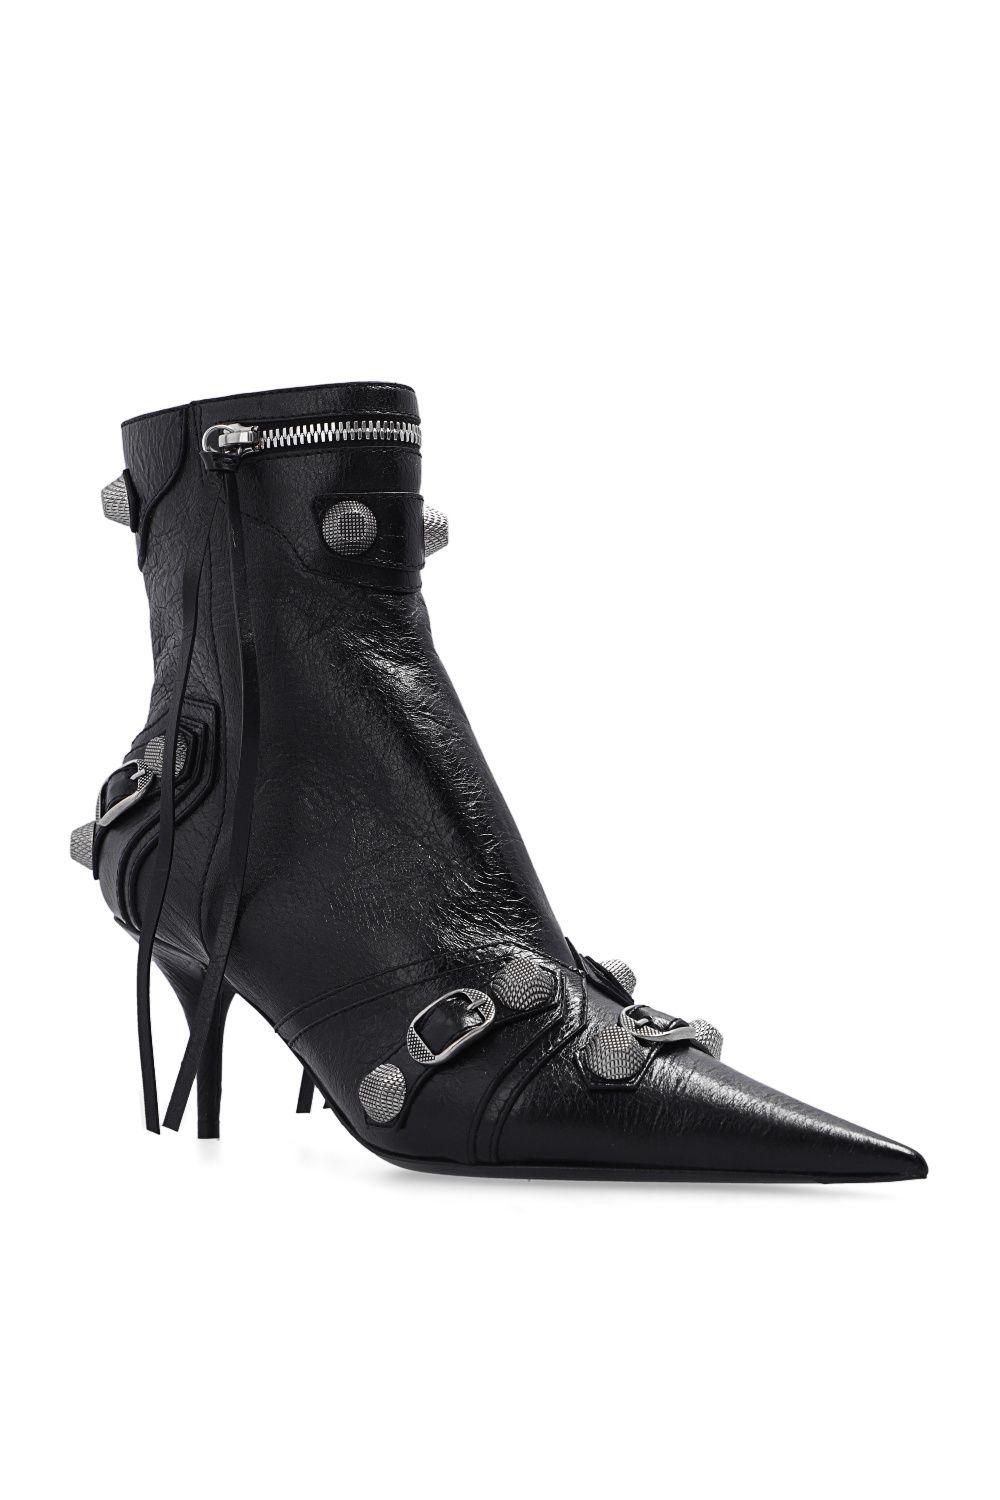 Cagole H90 Ankle Boots - Balenciaga - Leather - Black